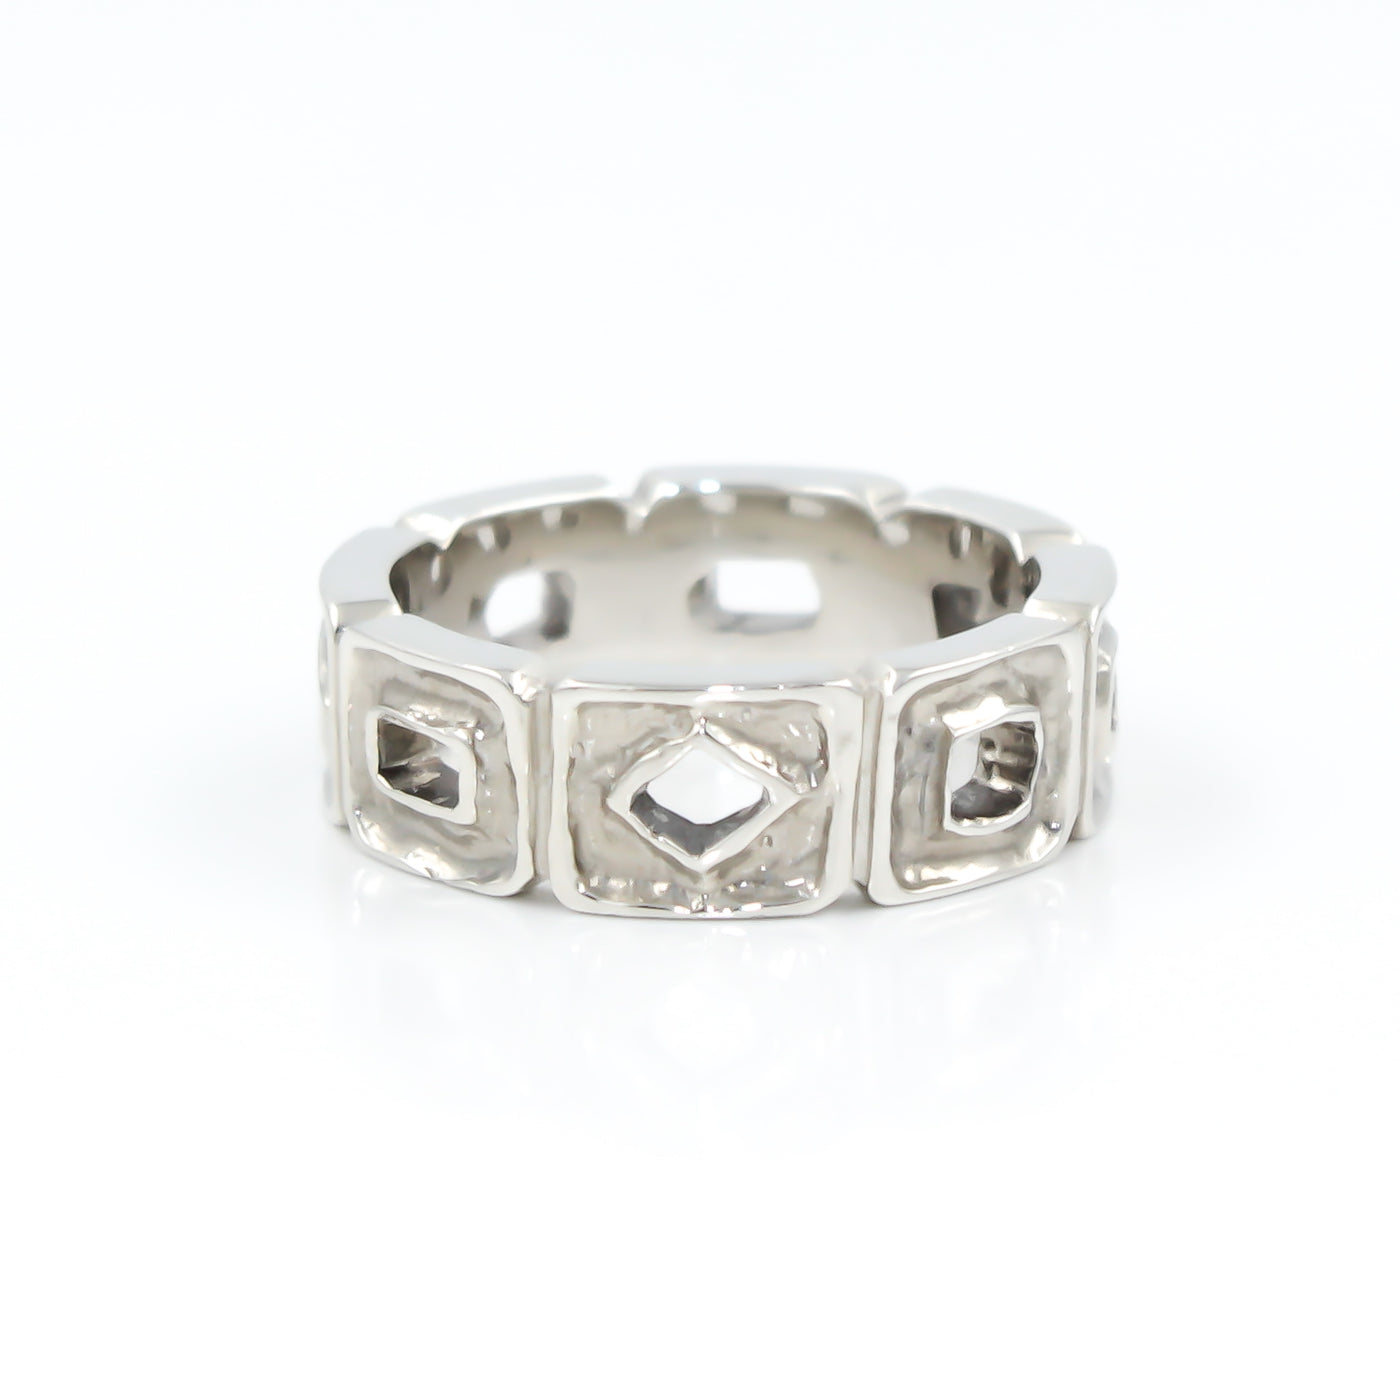 Carved Band with Rectangular and Diamond Shaped Cut-Outs